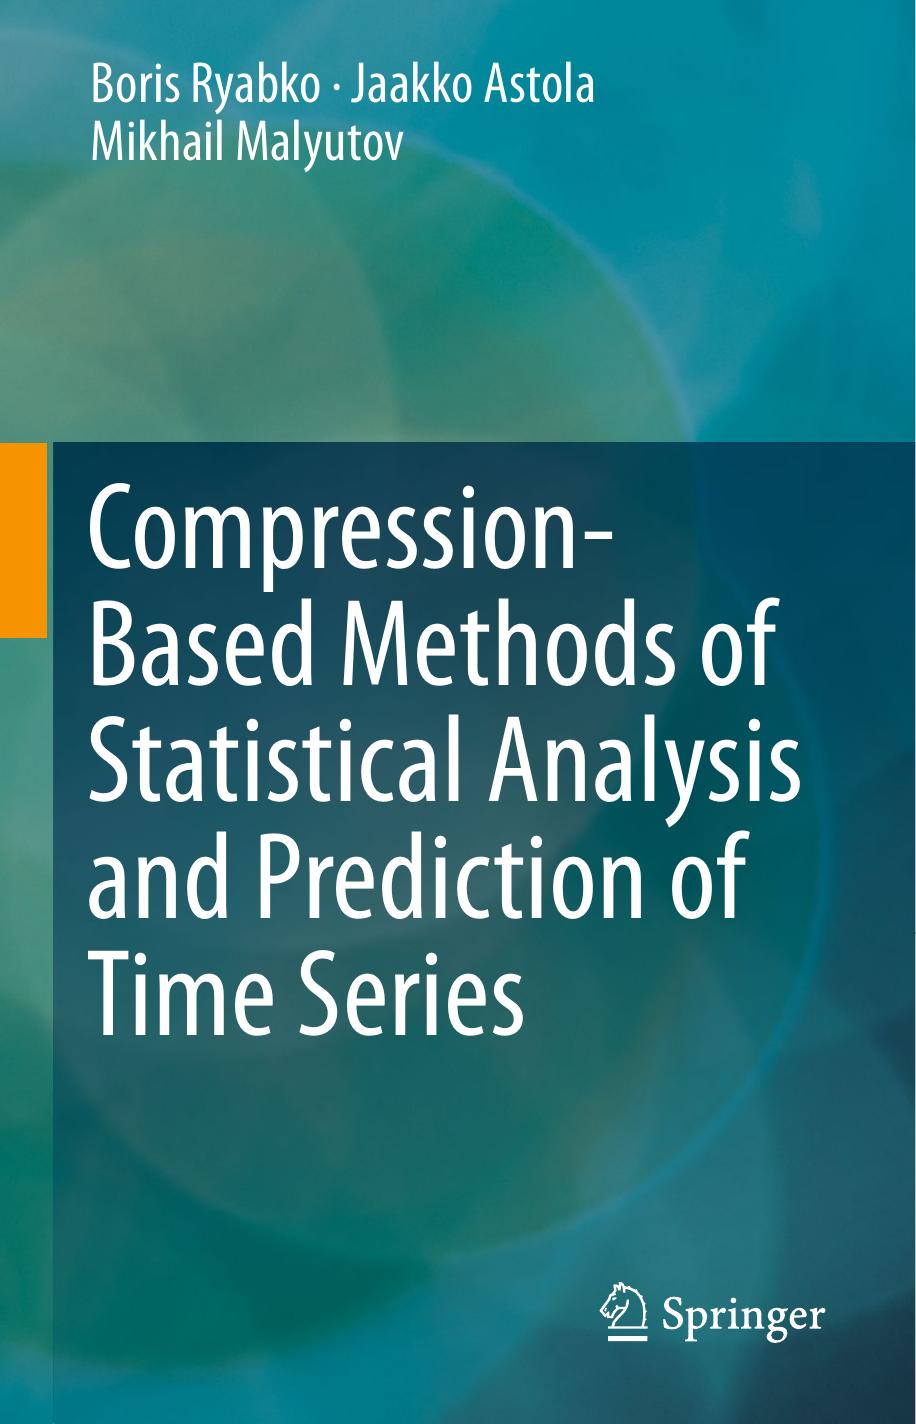 Compression-Based Methods of Statistical Analysis and Prediction of Time Series 2016.pdf